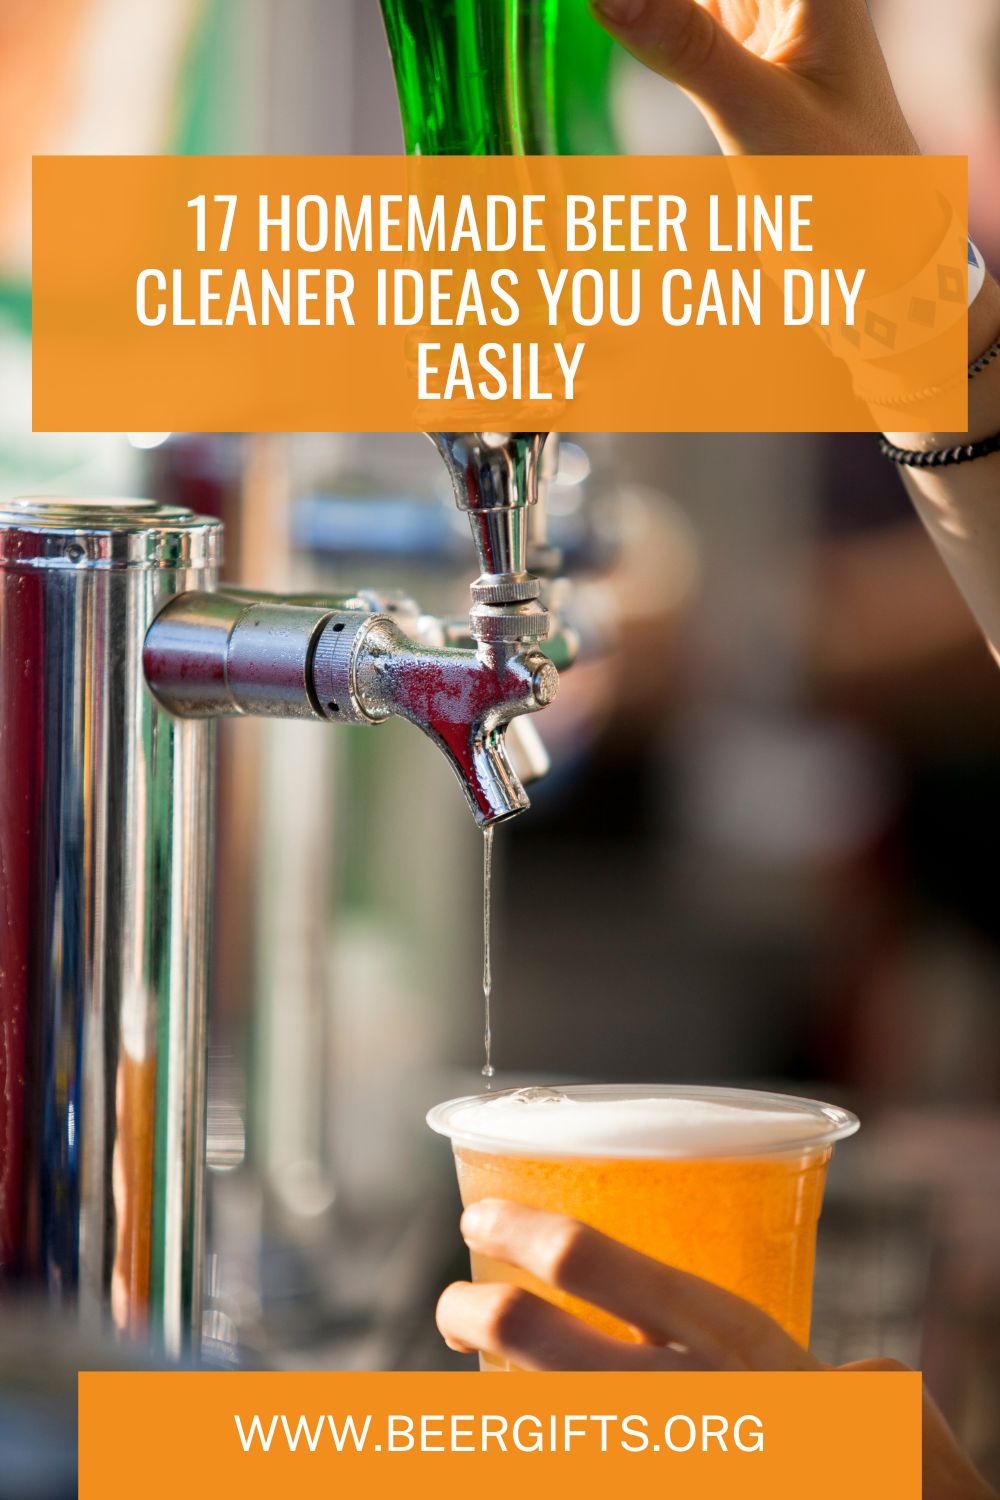 17 Homemade Beer Line Cleaner Ideas You Can DIY Easily8